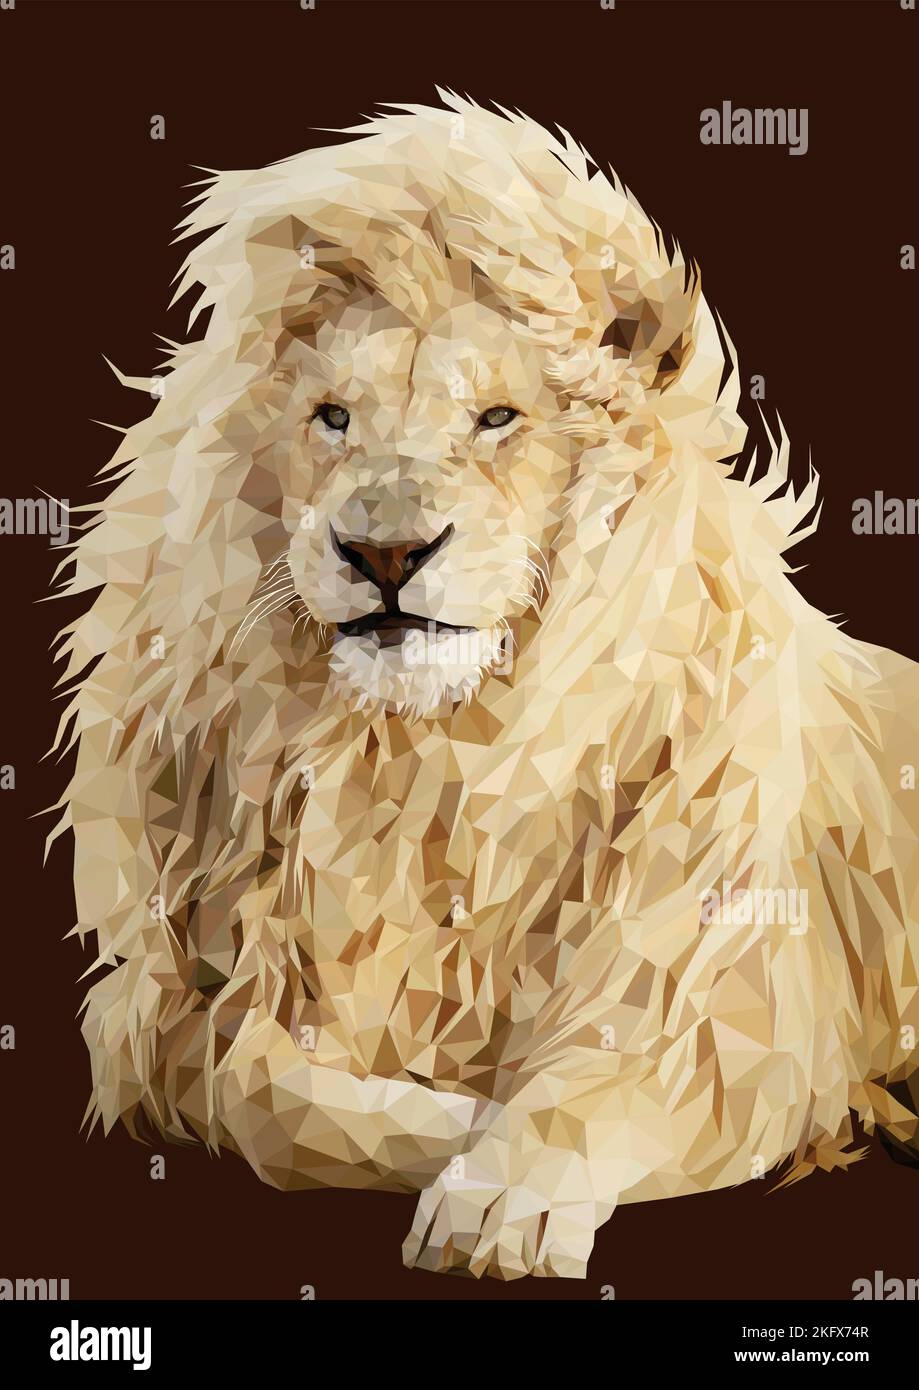 Lion low poly vector art Stock Vector